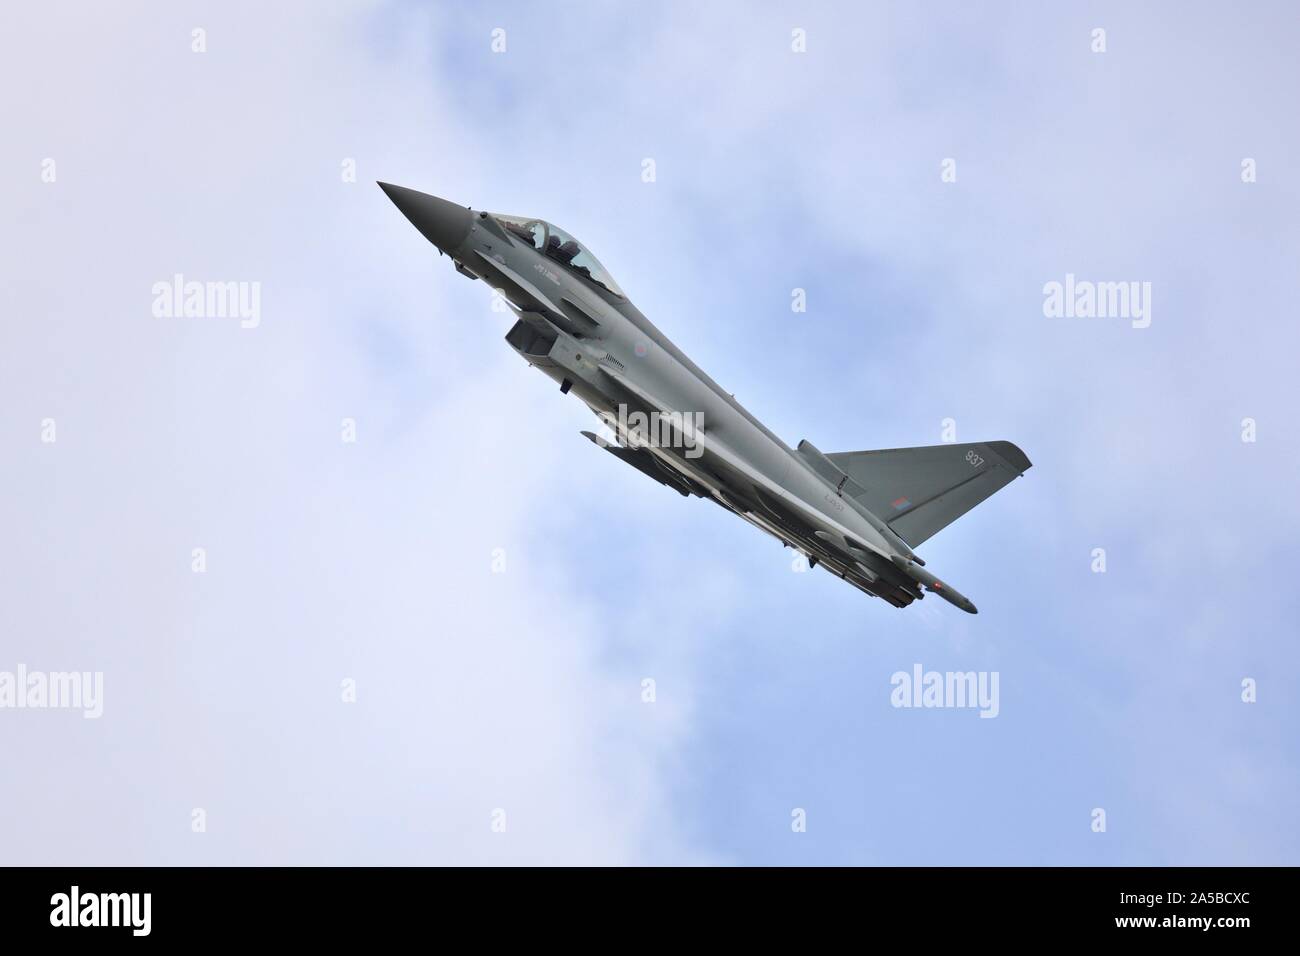 RAF Typhoon fighter jet performing at the Royal International Air Tattoo 2019 Stock Photo